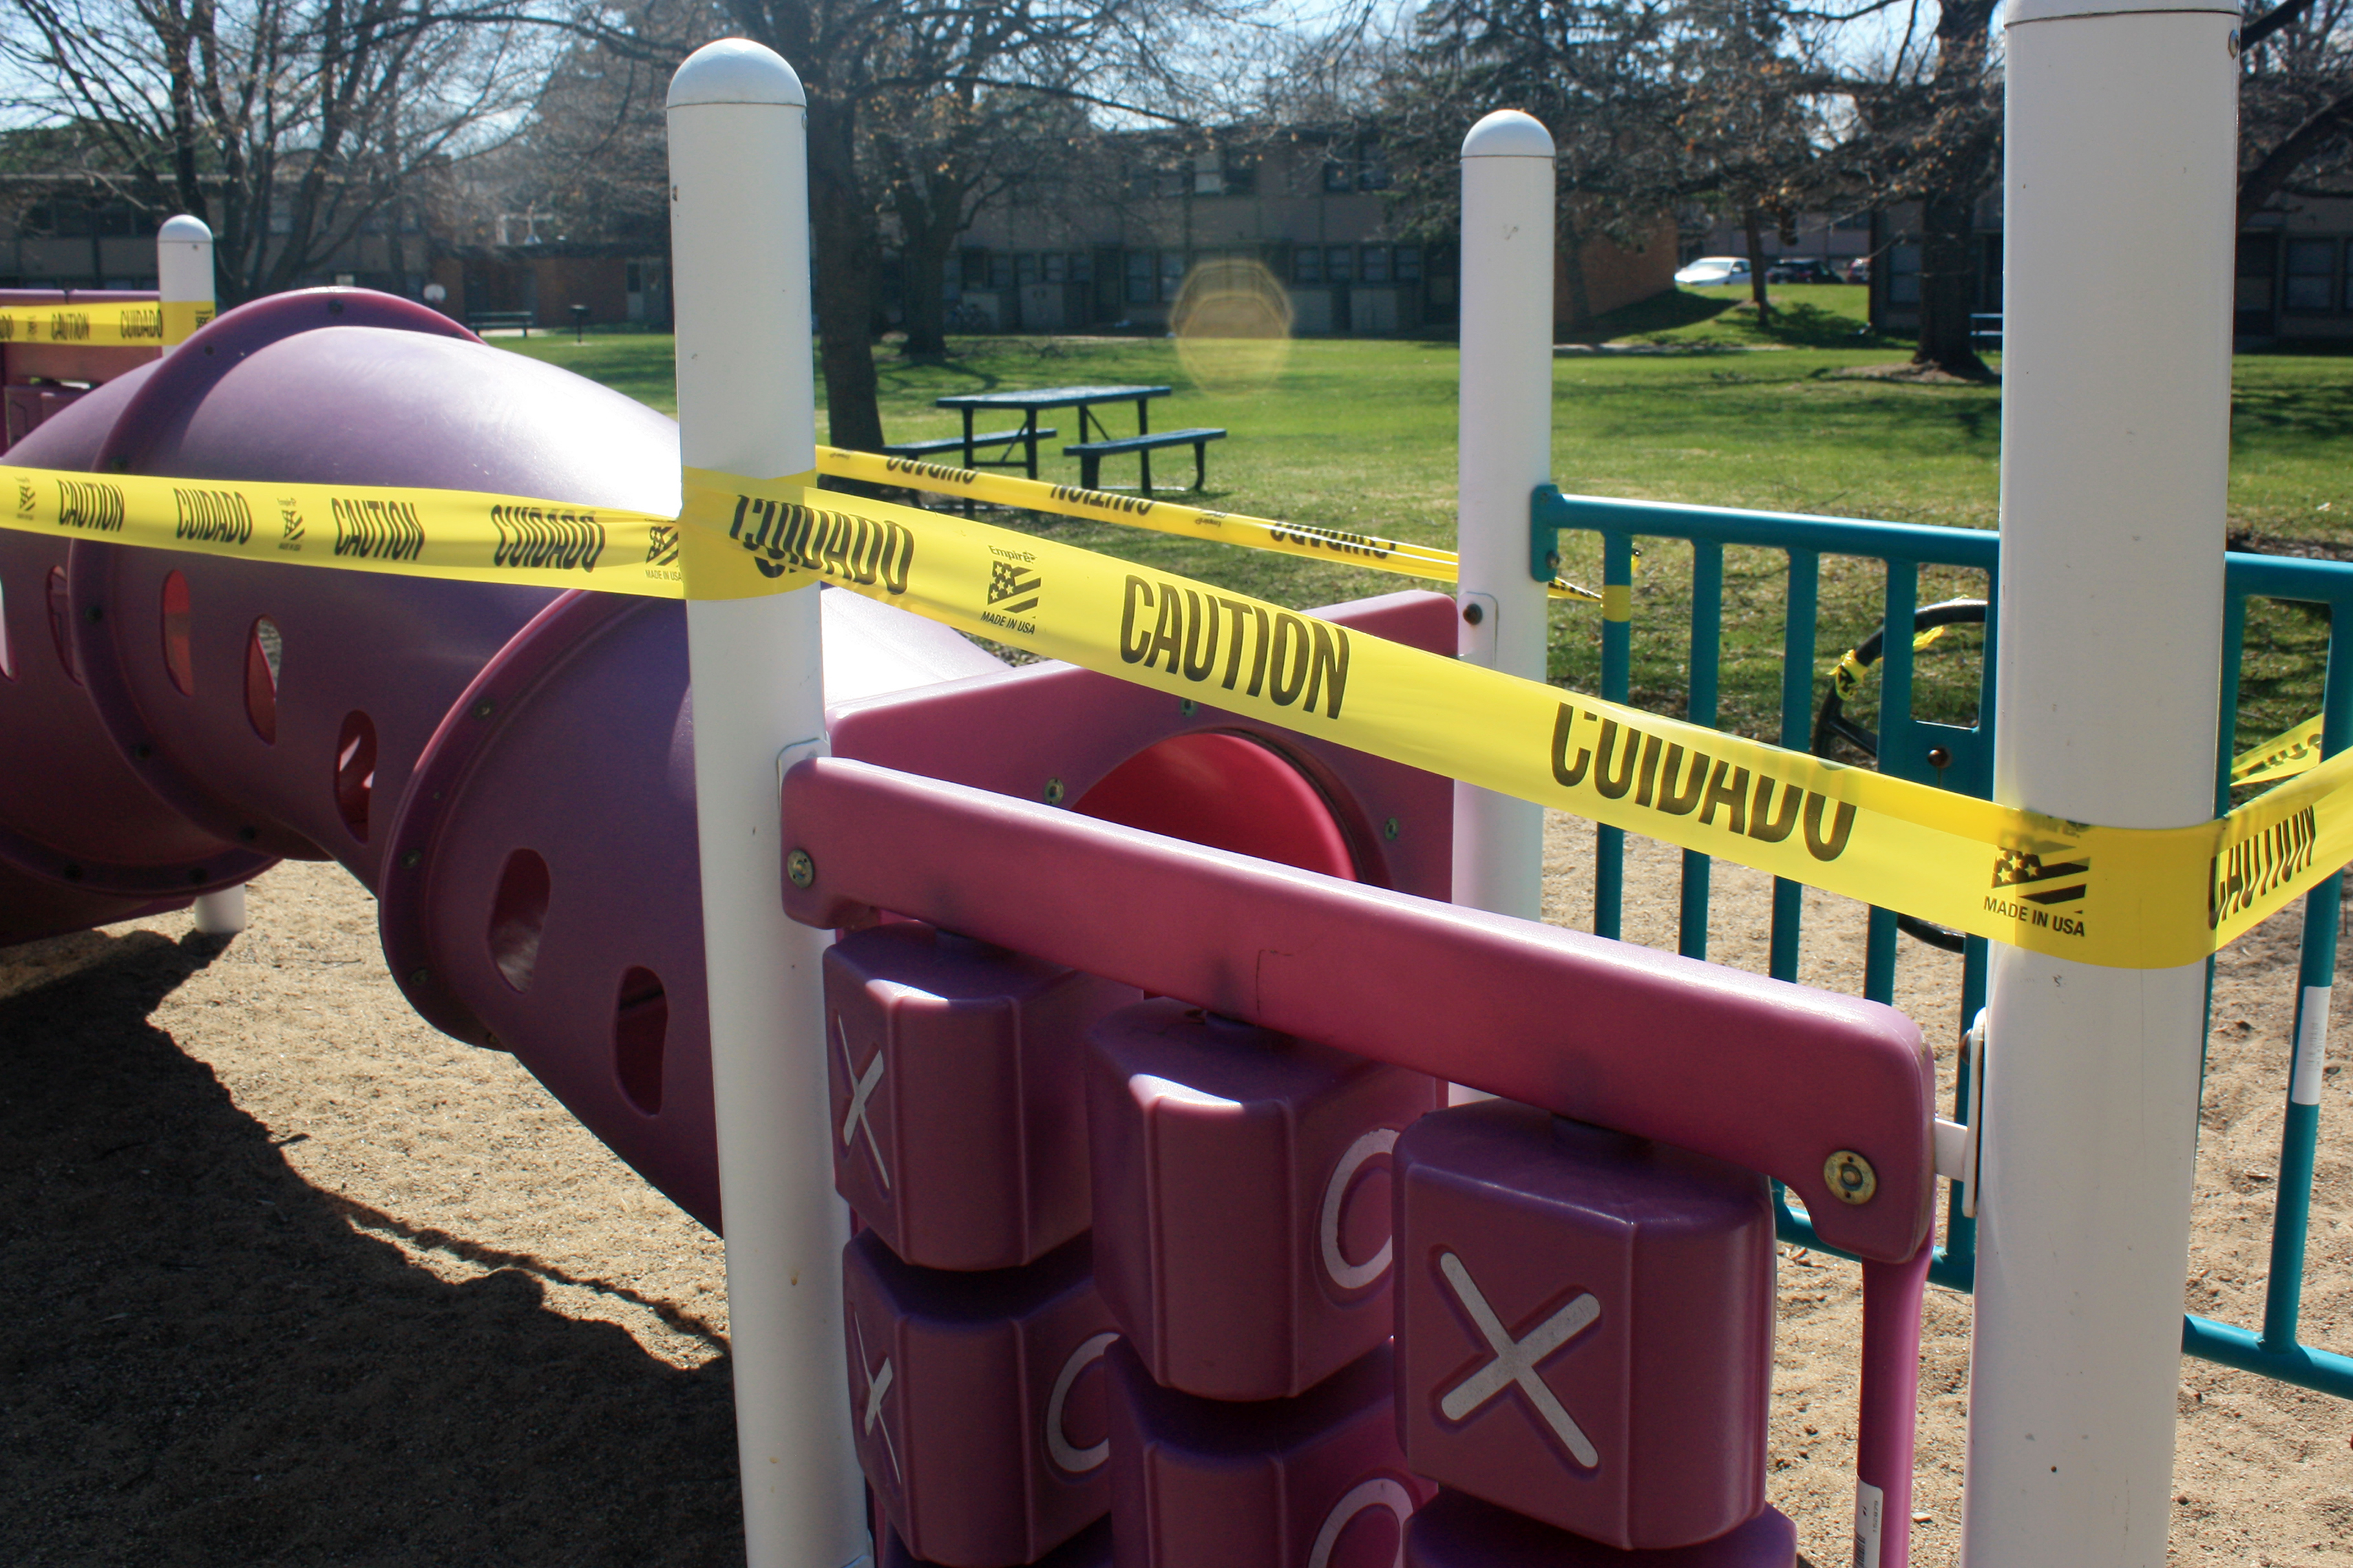 CTC Playground Closed with Caution Tape